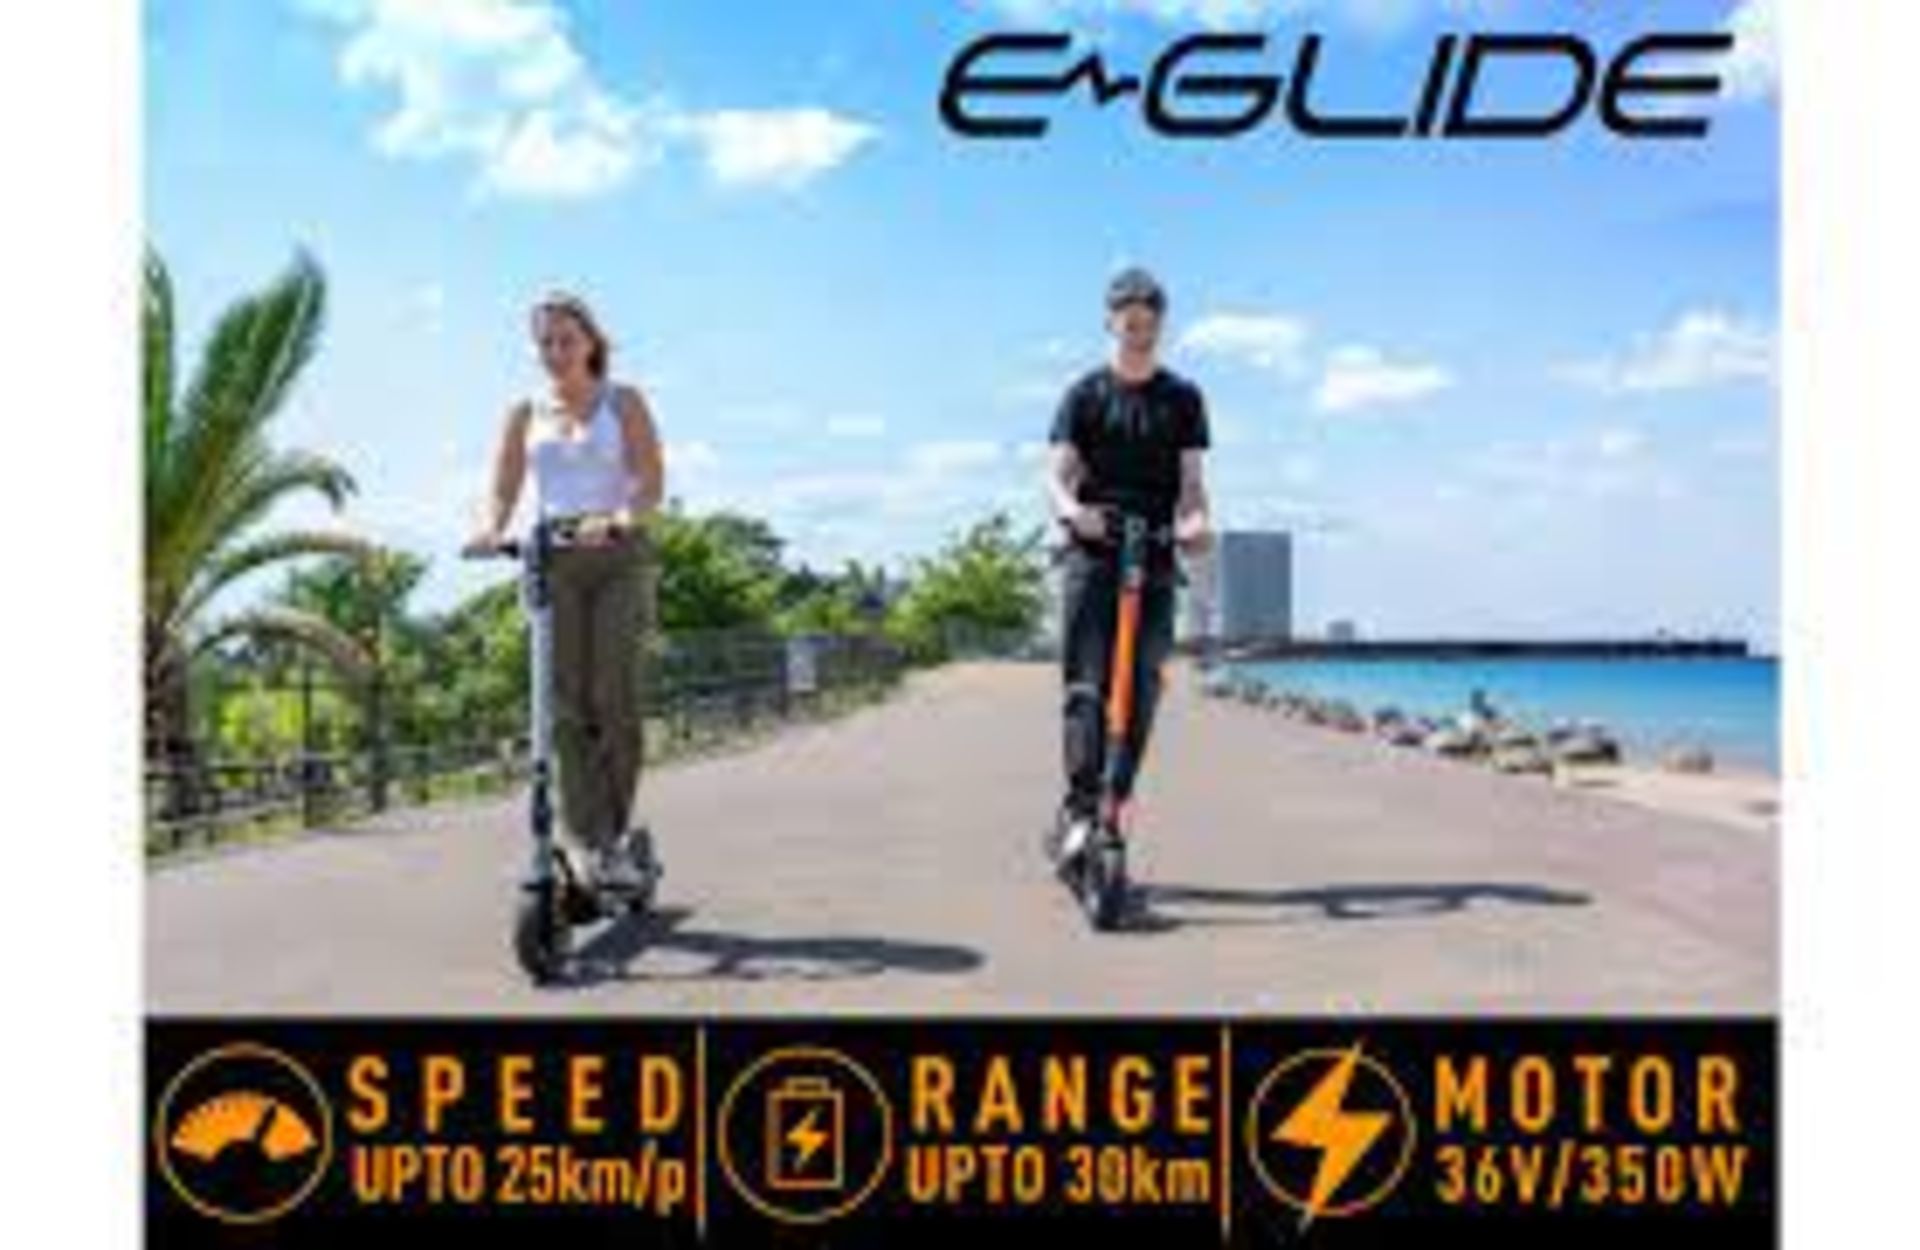 Trade Lot 4 x Brand New E-Glide V2 Electric Scooter Orange and Black RRP £599, Introducing a sleek - Image 3 of 3